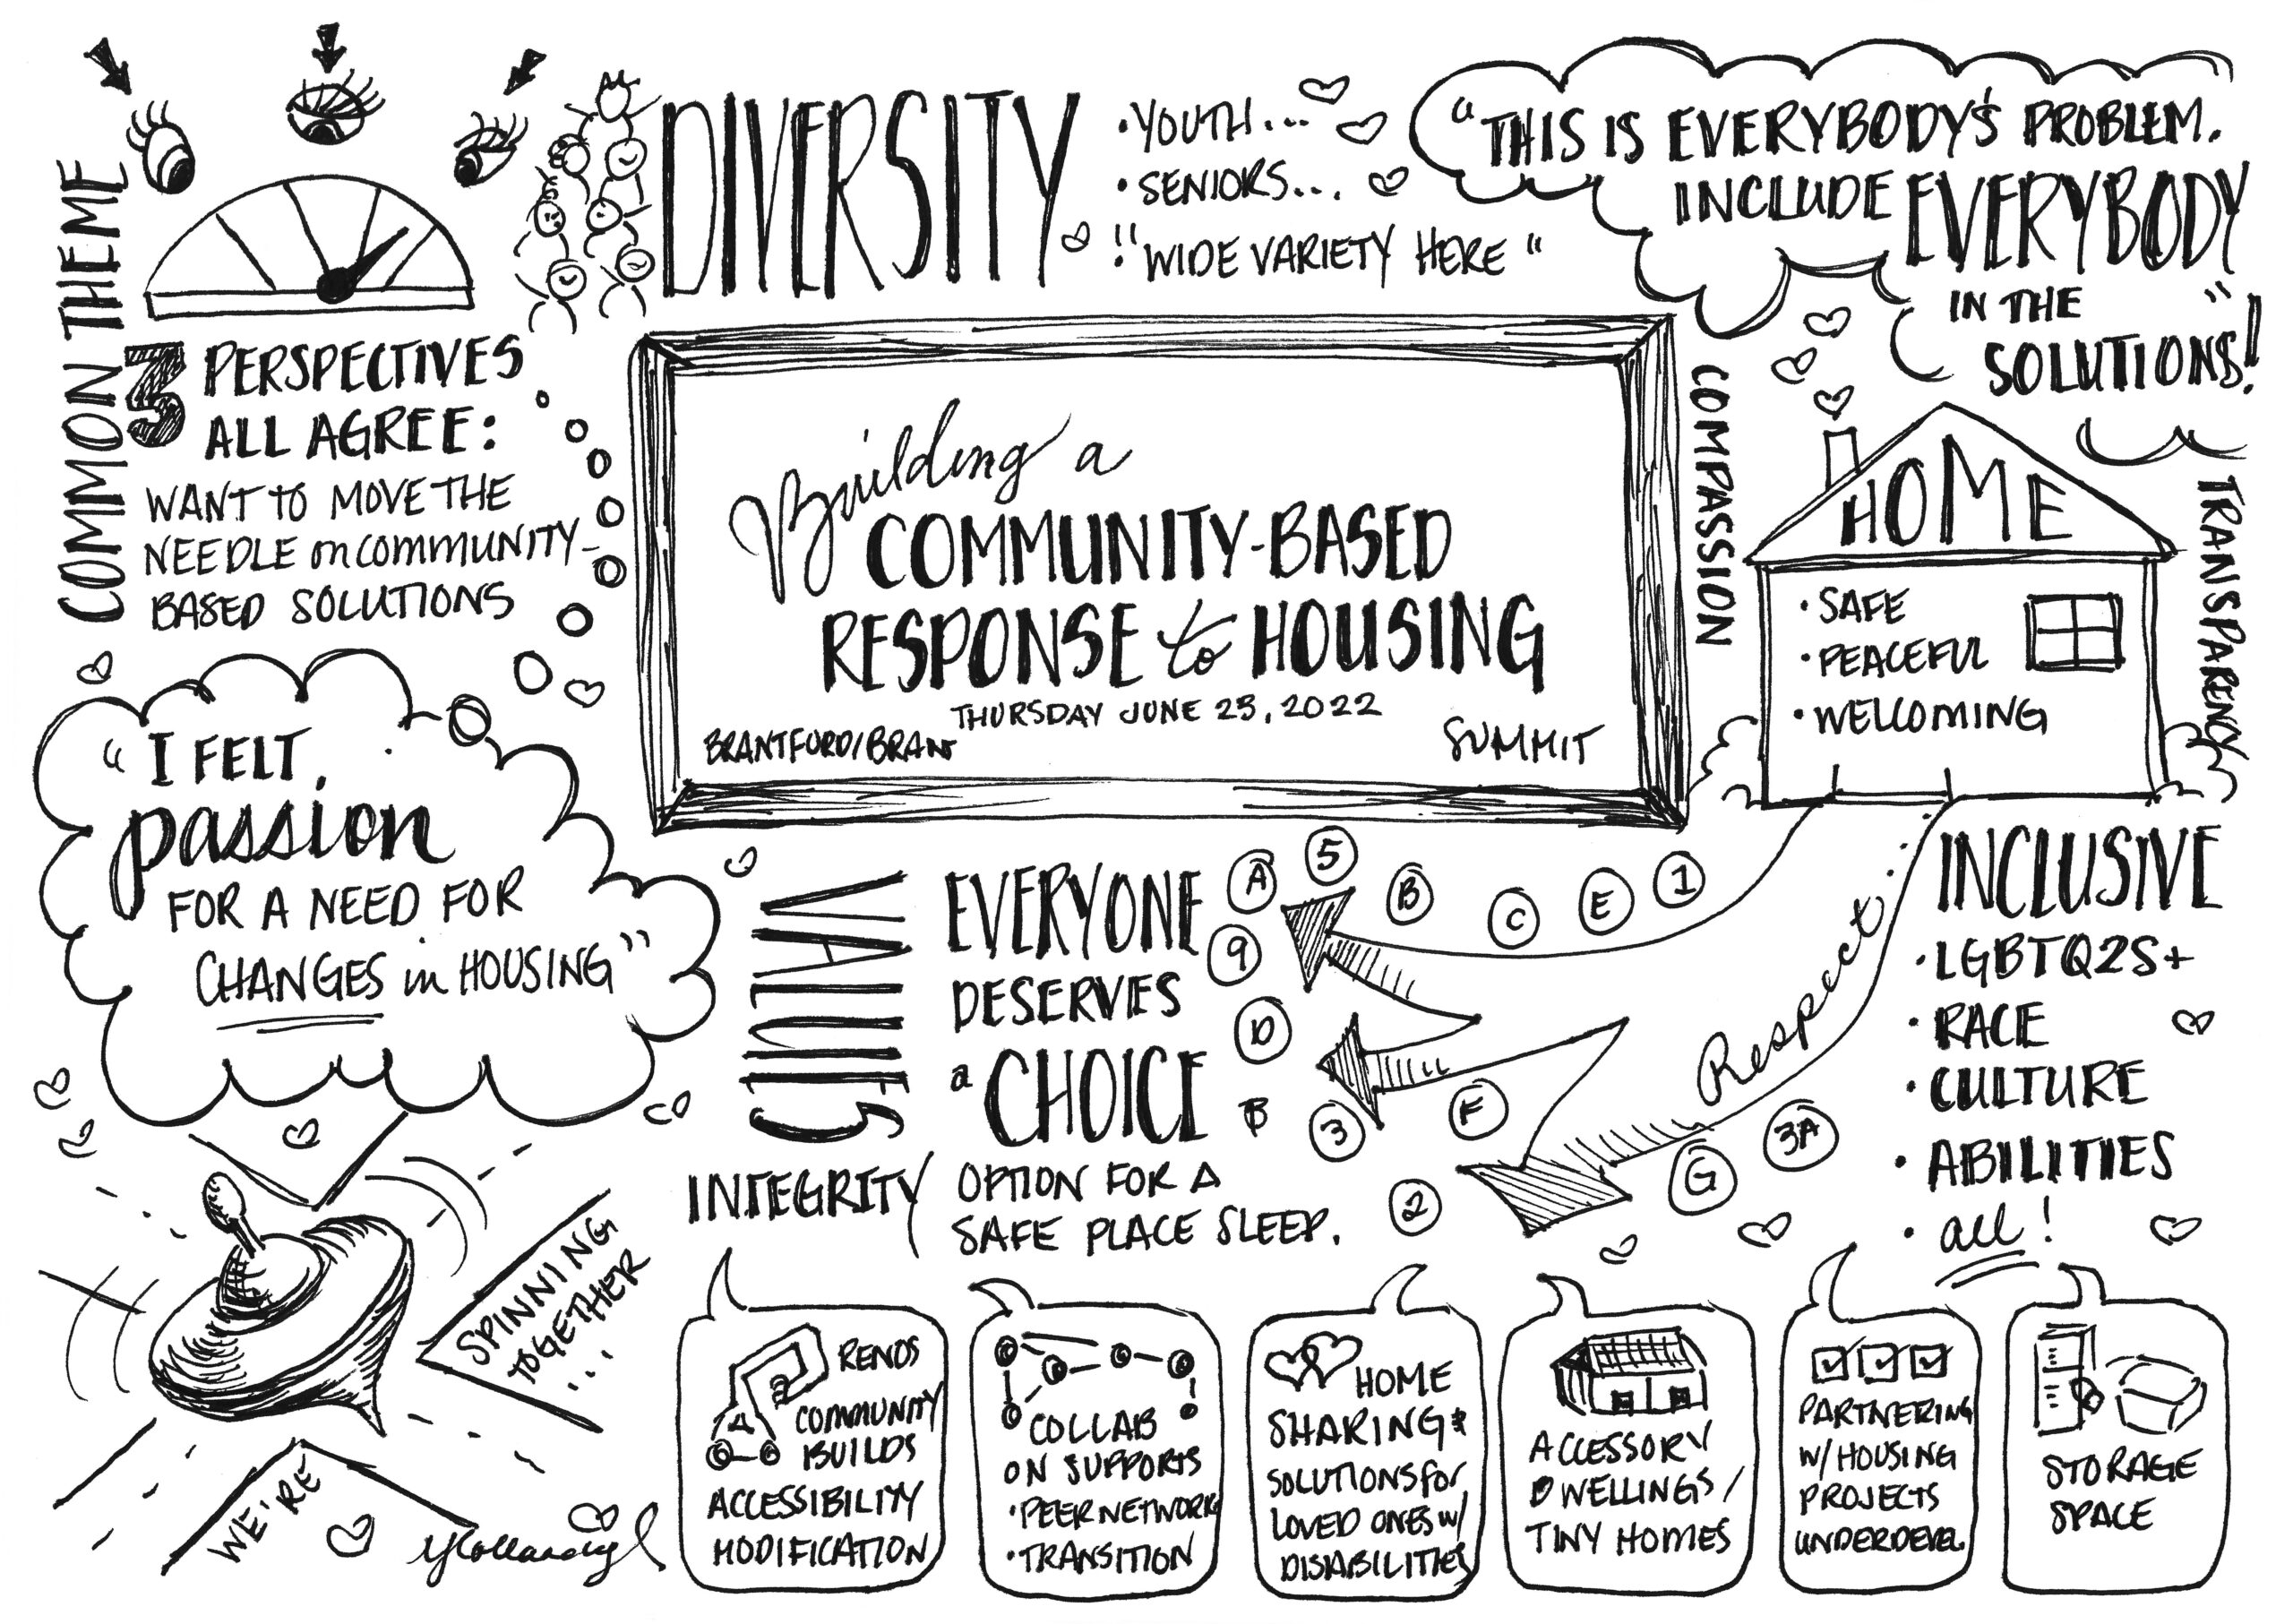 A graphic reflection done live during the June 23 CLB Community-Based Response to Housing Summit by Yvonne Hollandy. 